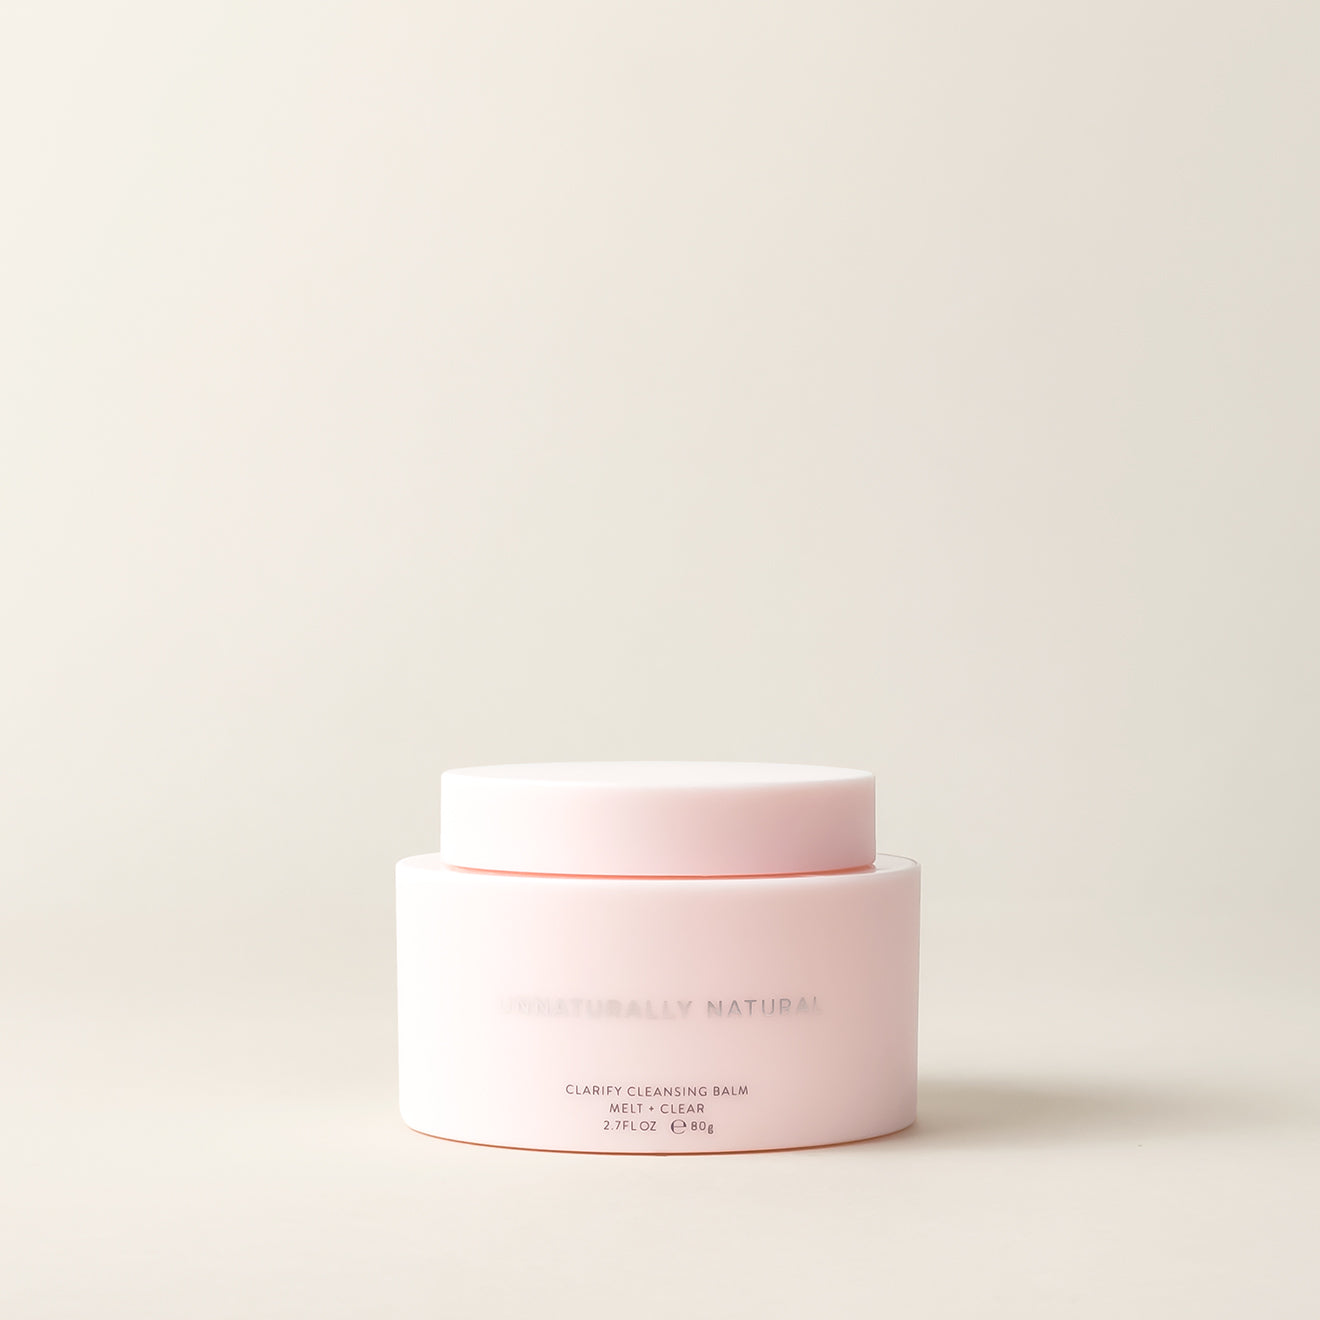 UNNATURALLY NATURAL Clarify Cleansing Balm